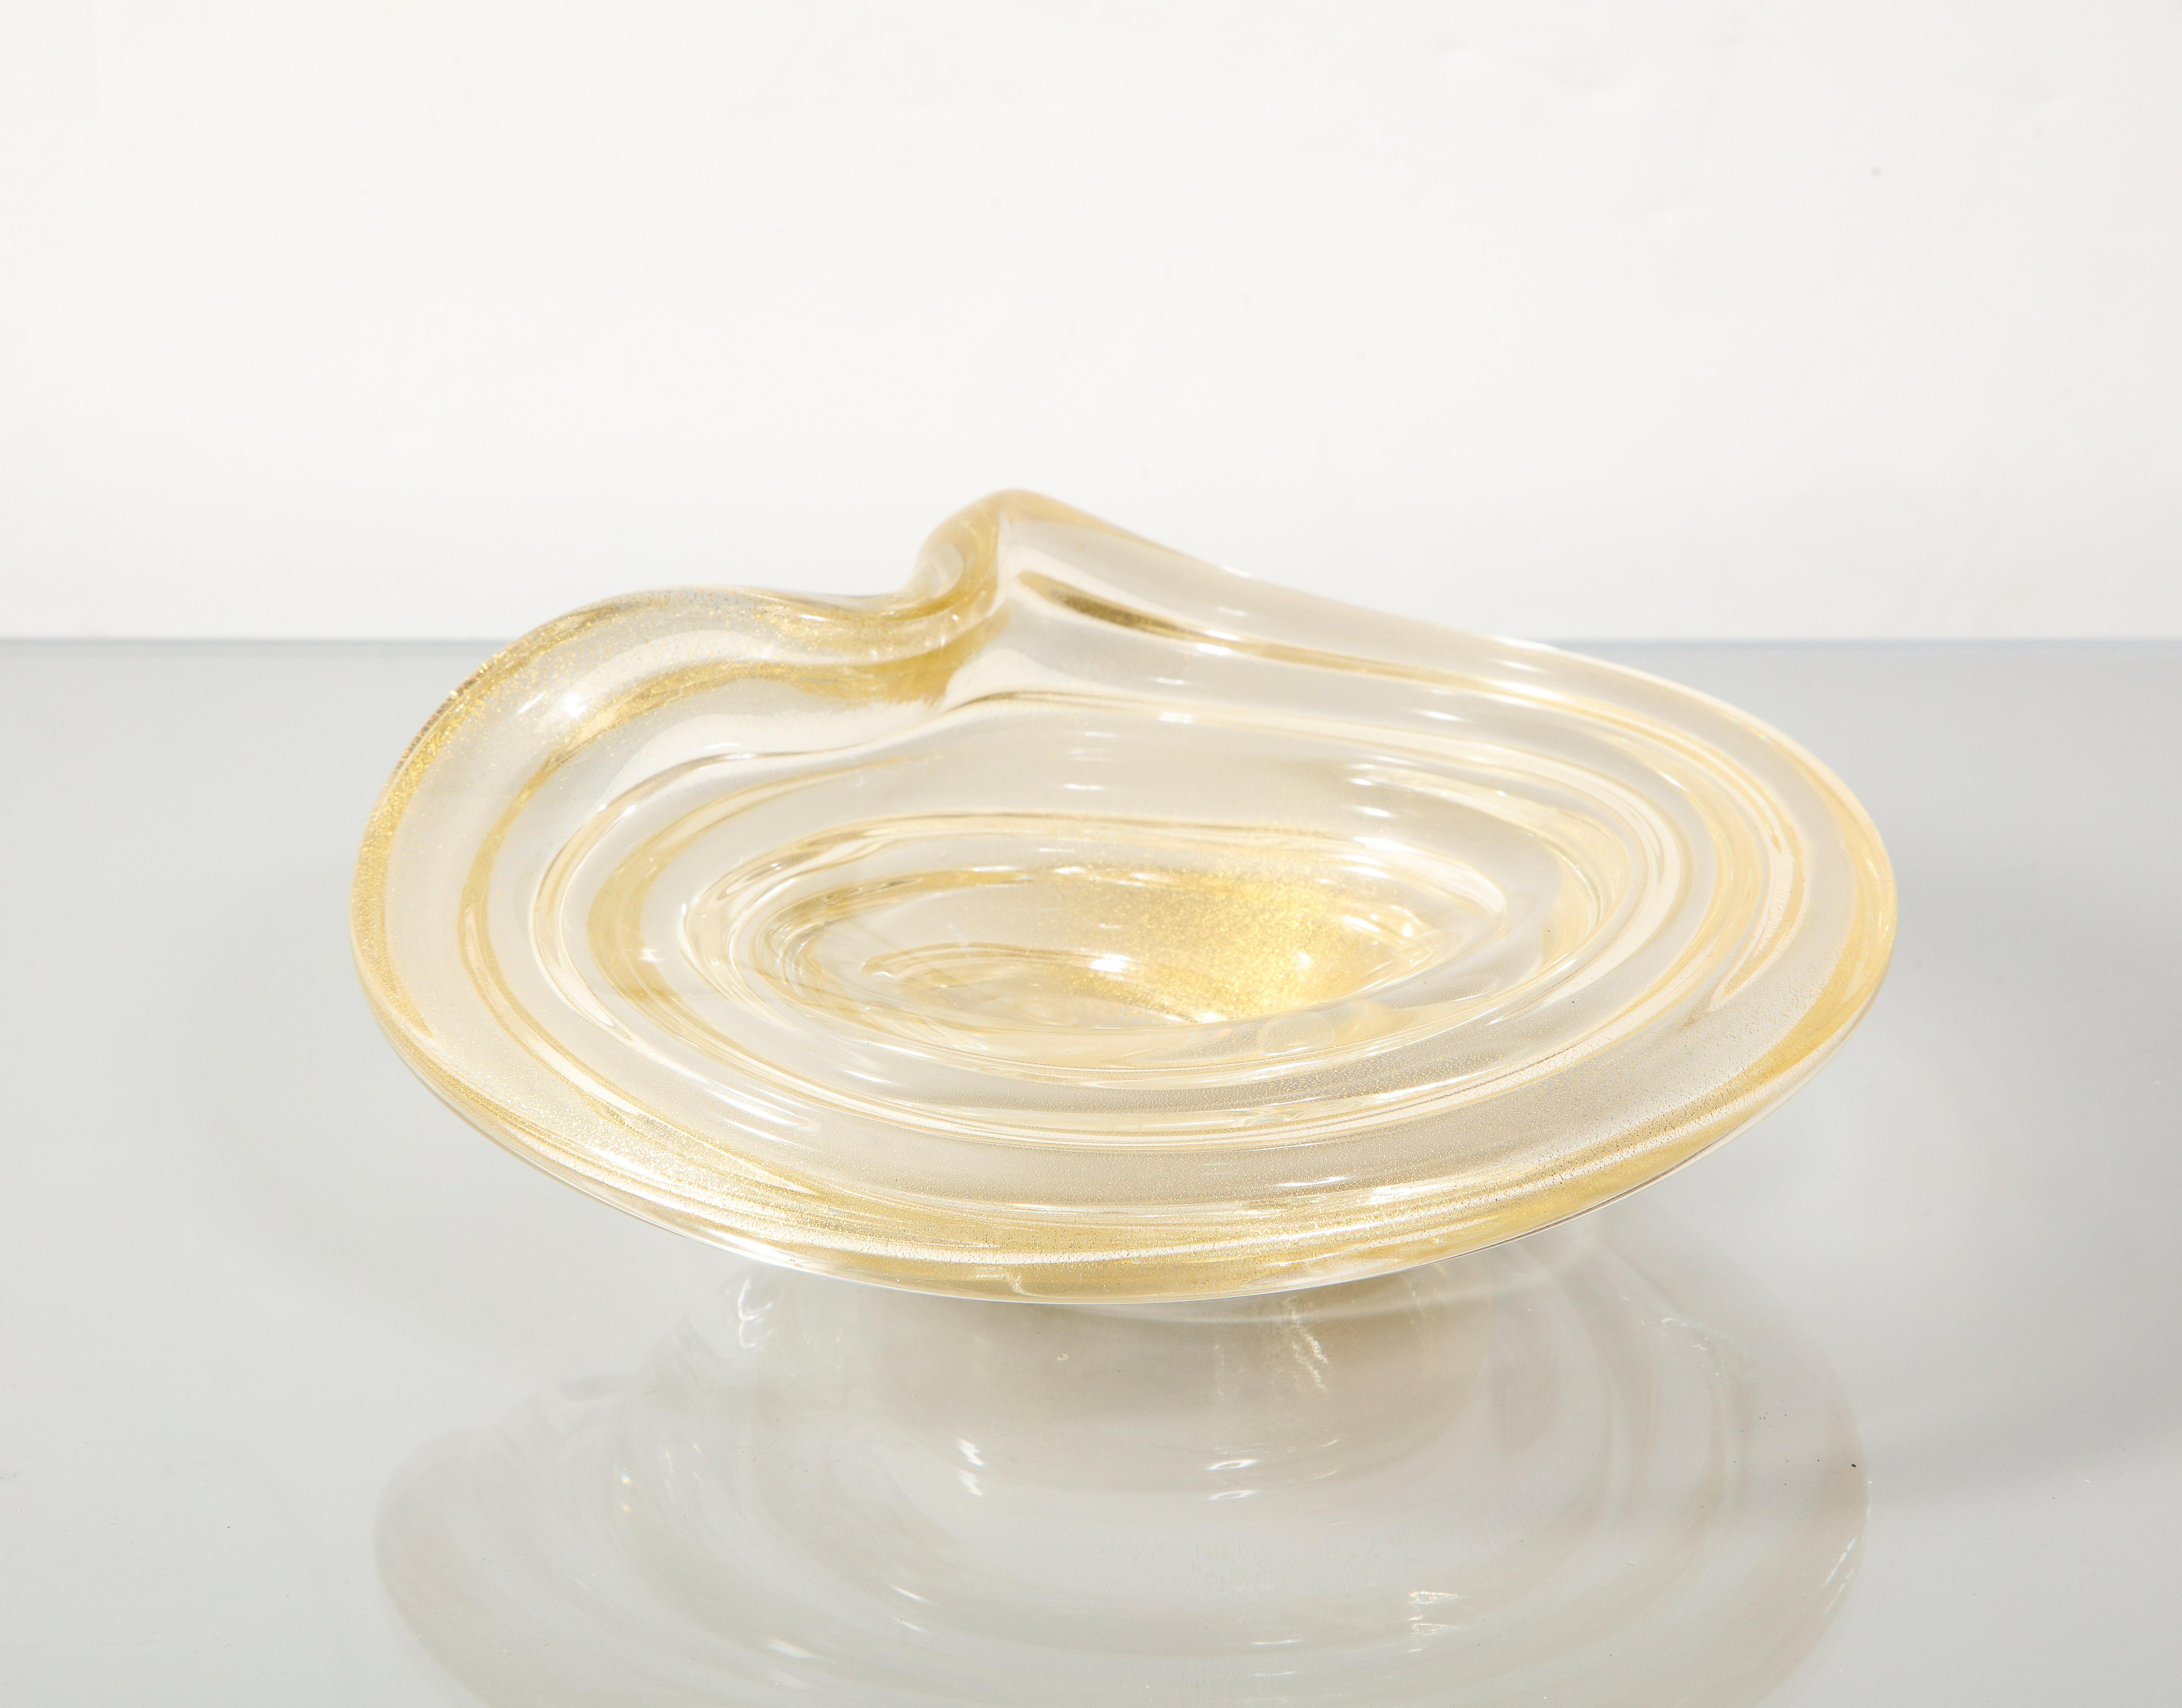 Vintage Murano Aventurine glass bowl with 24-Karat gold dust by Alberto Donà. 2 other designs are available.